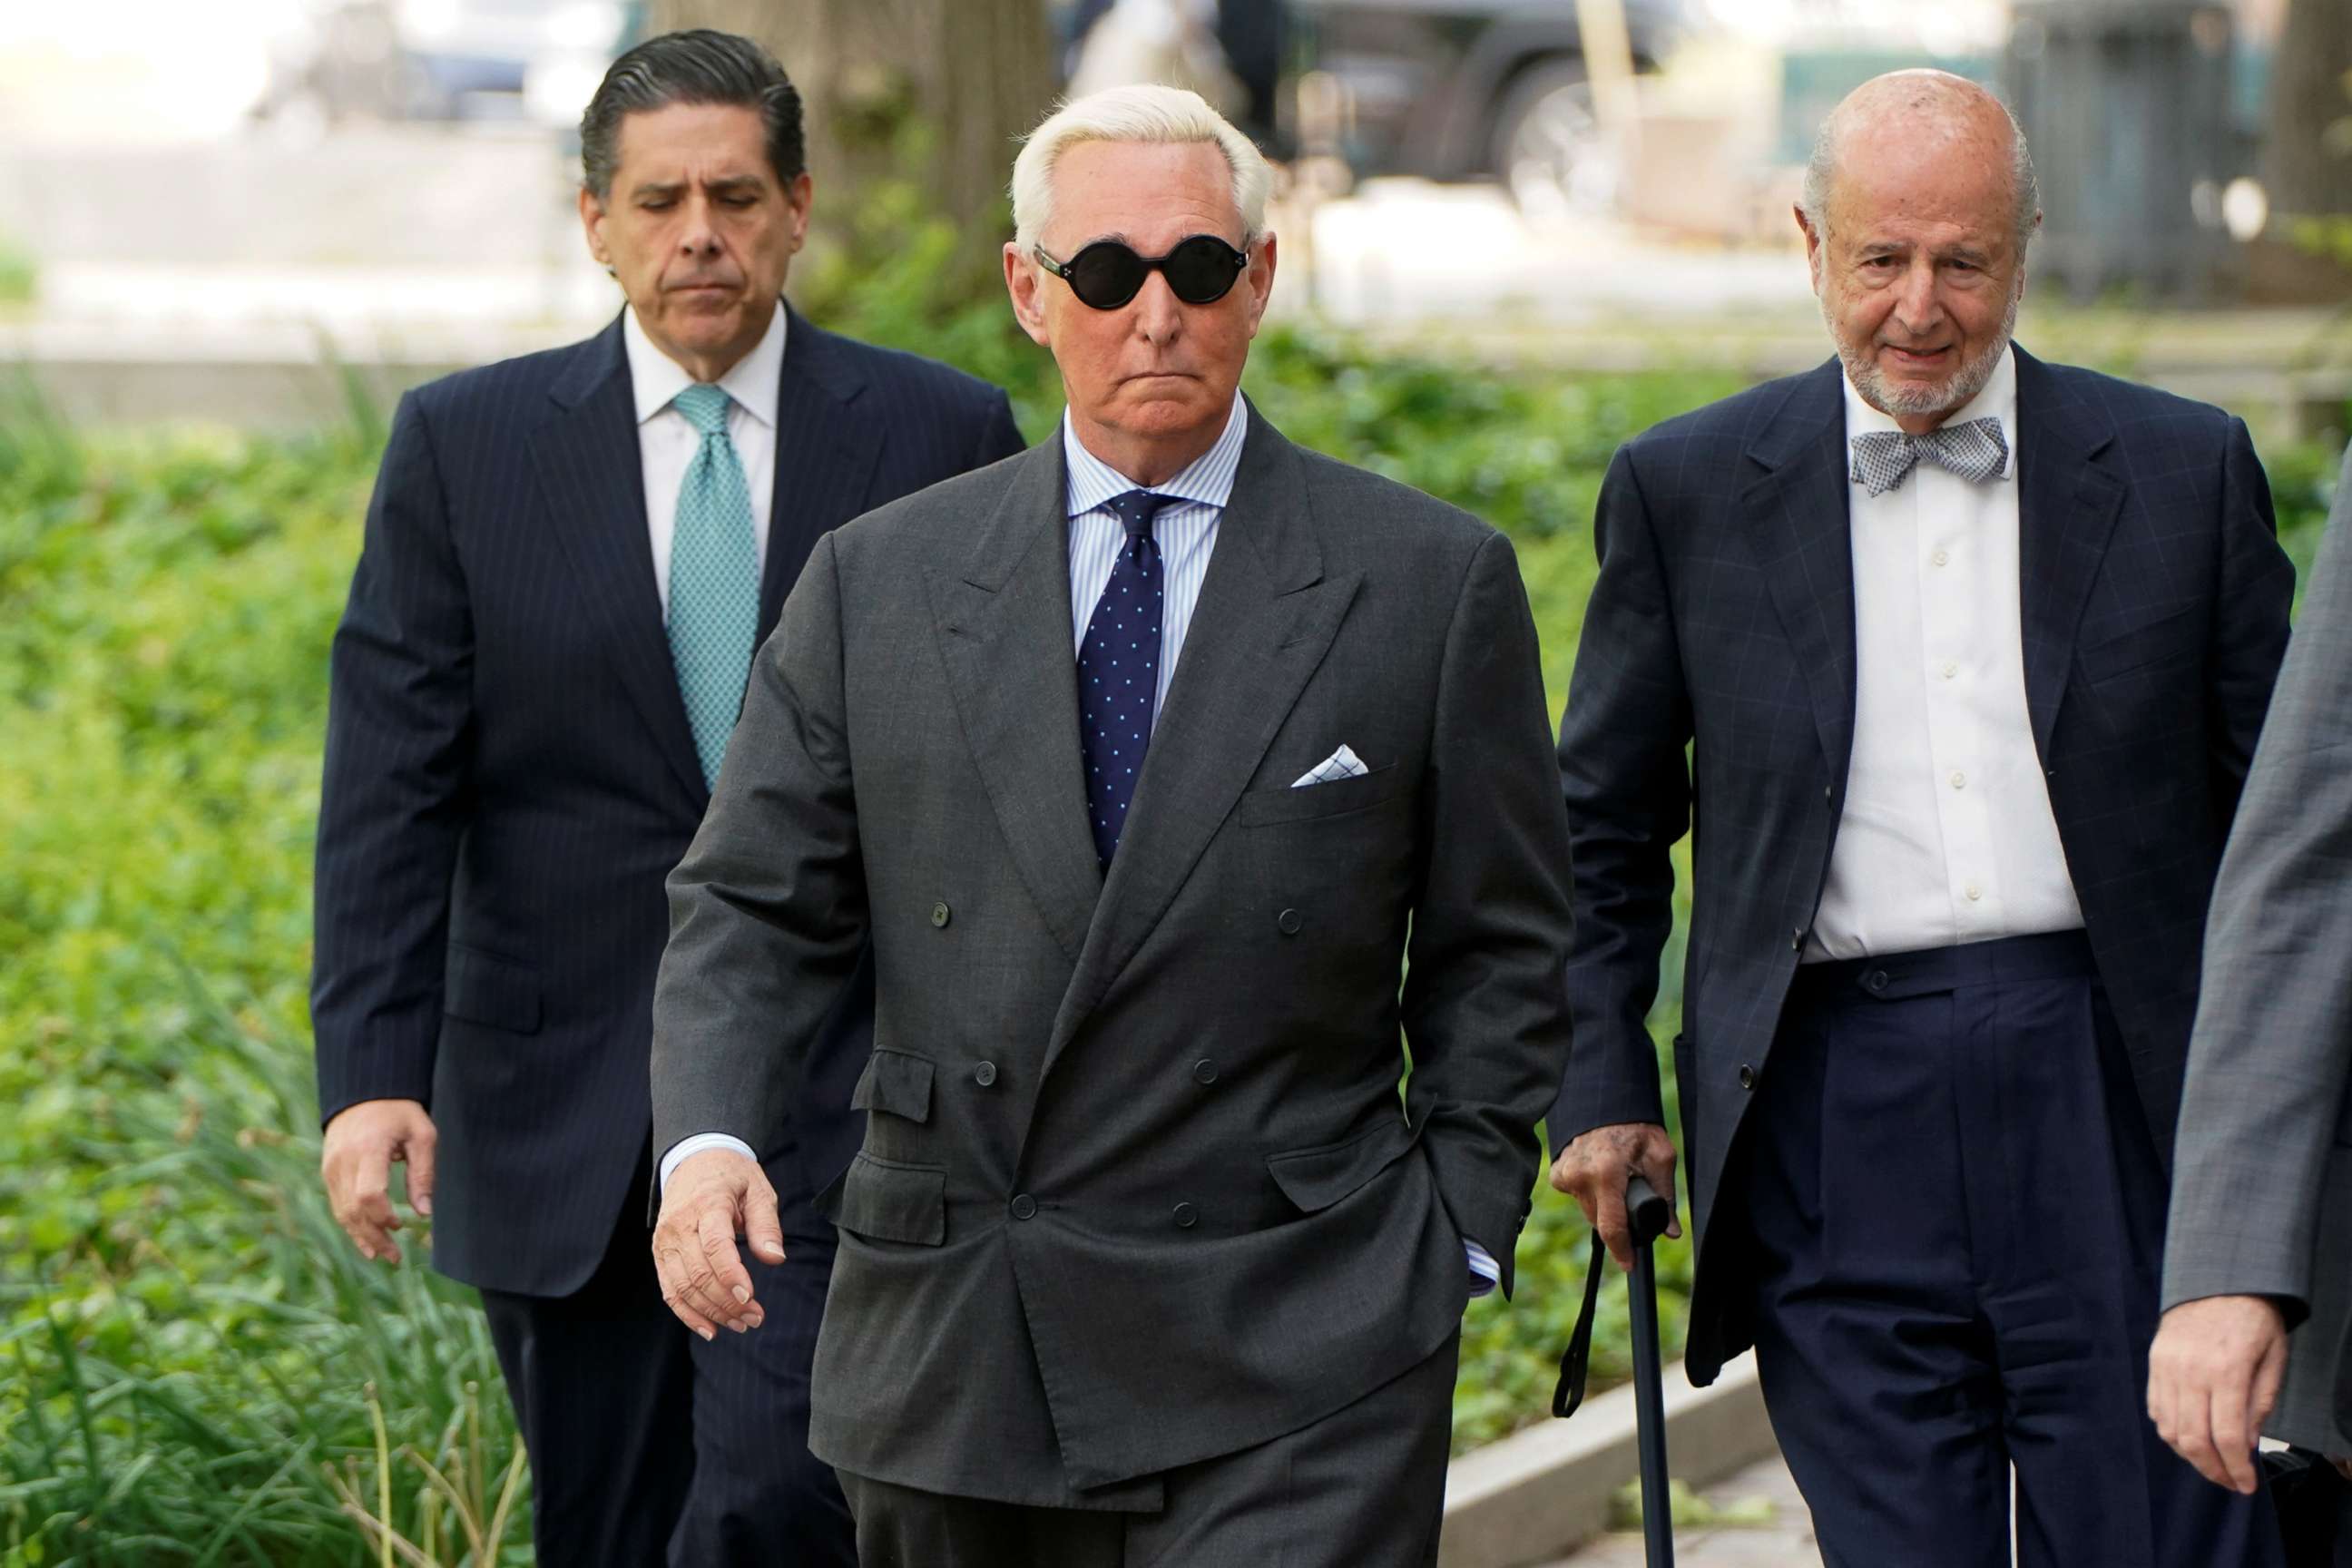 PHOTO: Roger Stone, longtime political ally of President Donald Trump, arrives for a status hearing in the criminal case against him brought by Special Counsel Robert Mueller at U.S. District Court in Washington, D.C., April 30, 2019.